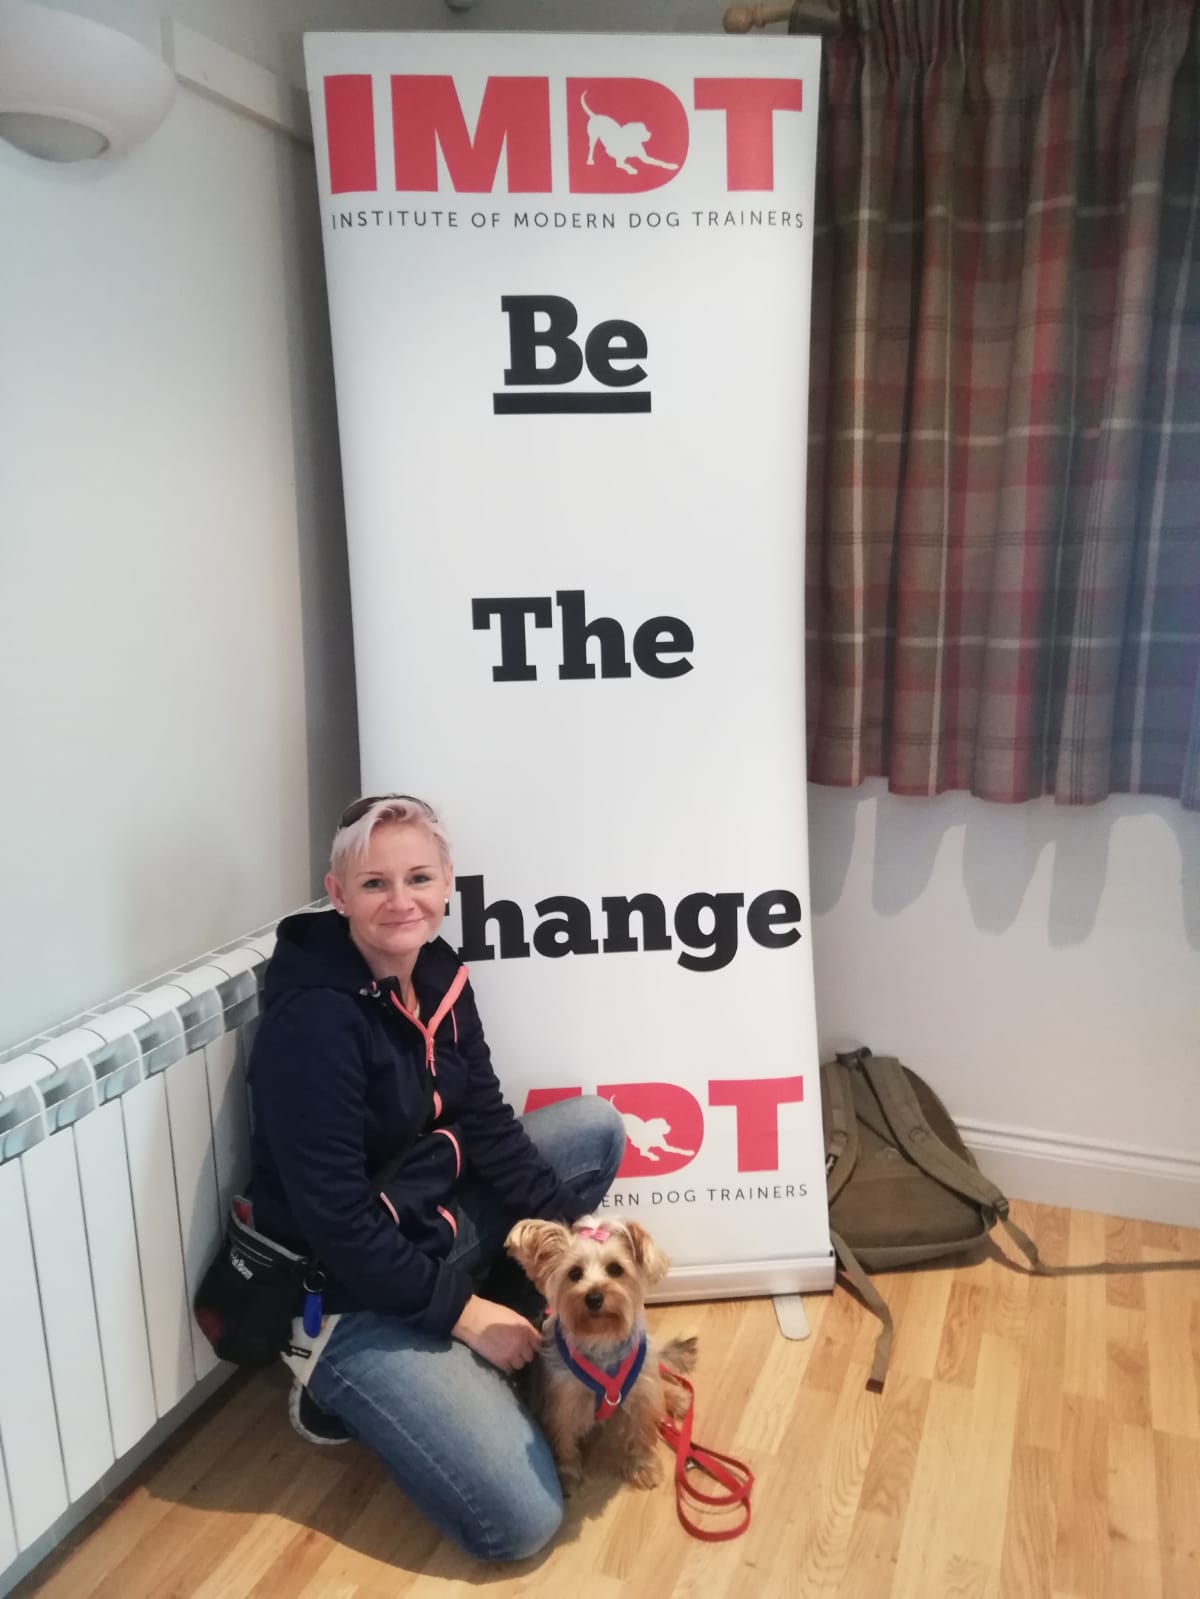 Middle-aged woman knelt with her dog in front of a banner for the Institute of Modern Dog Trainers